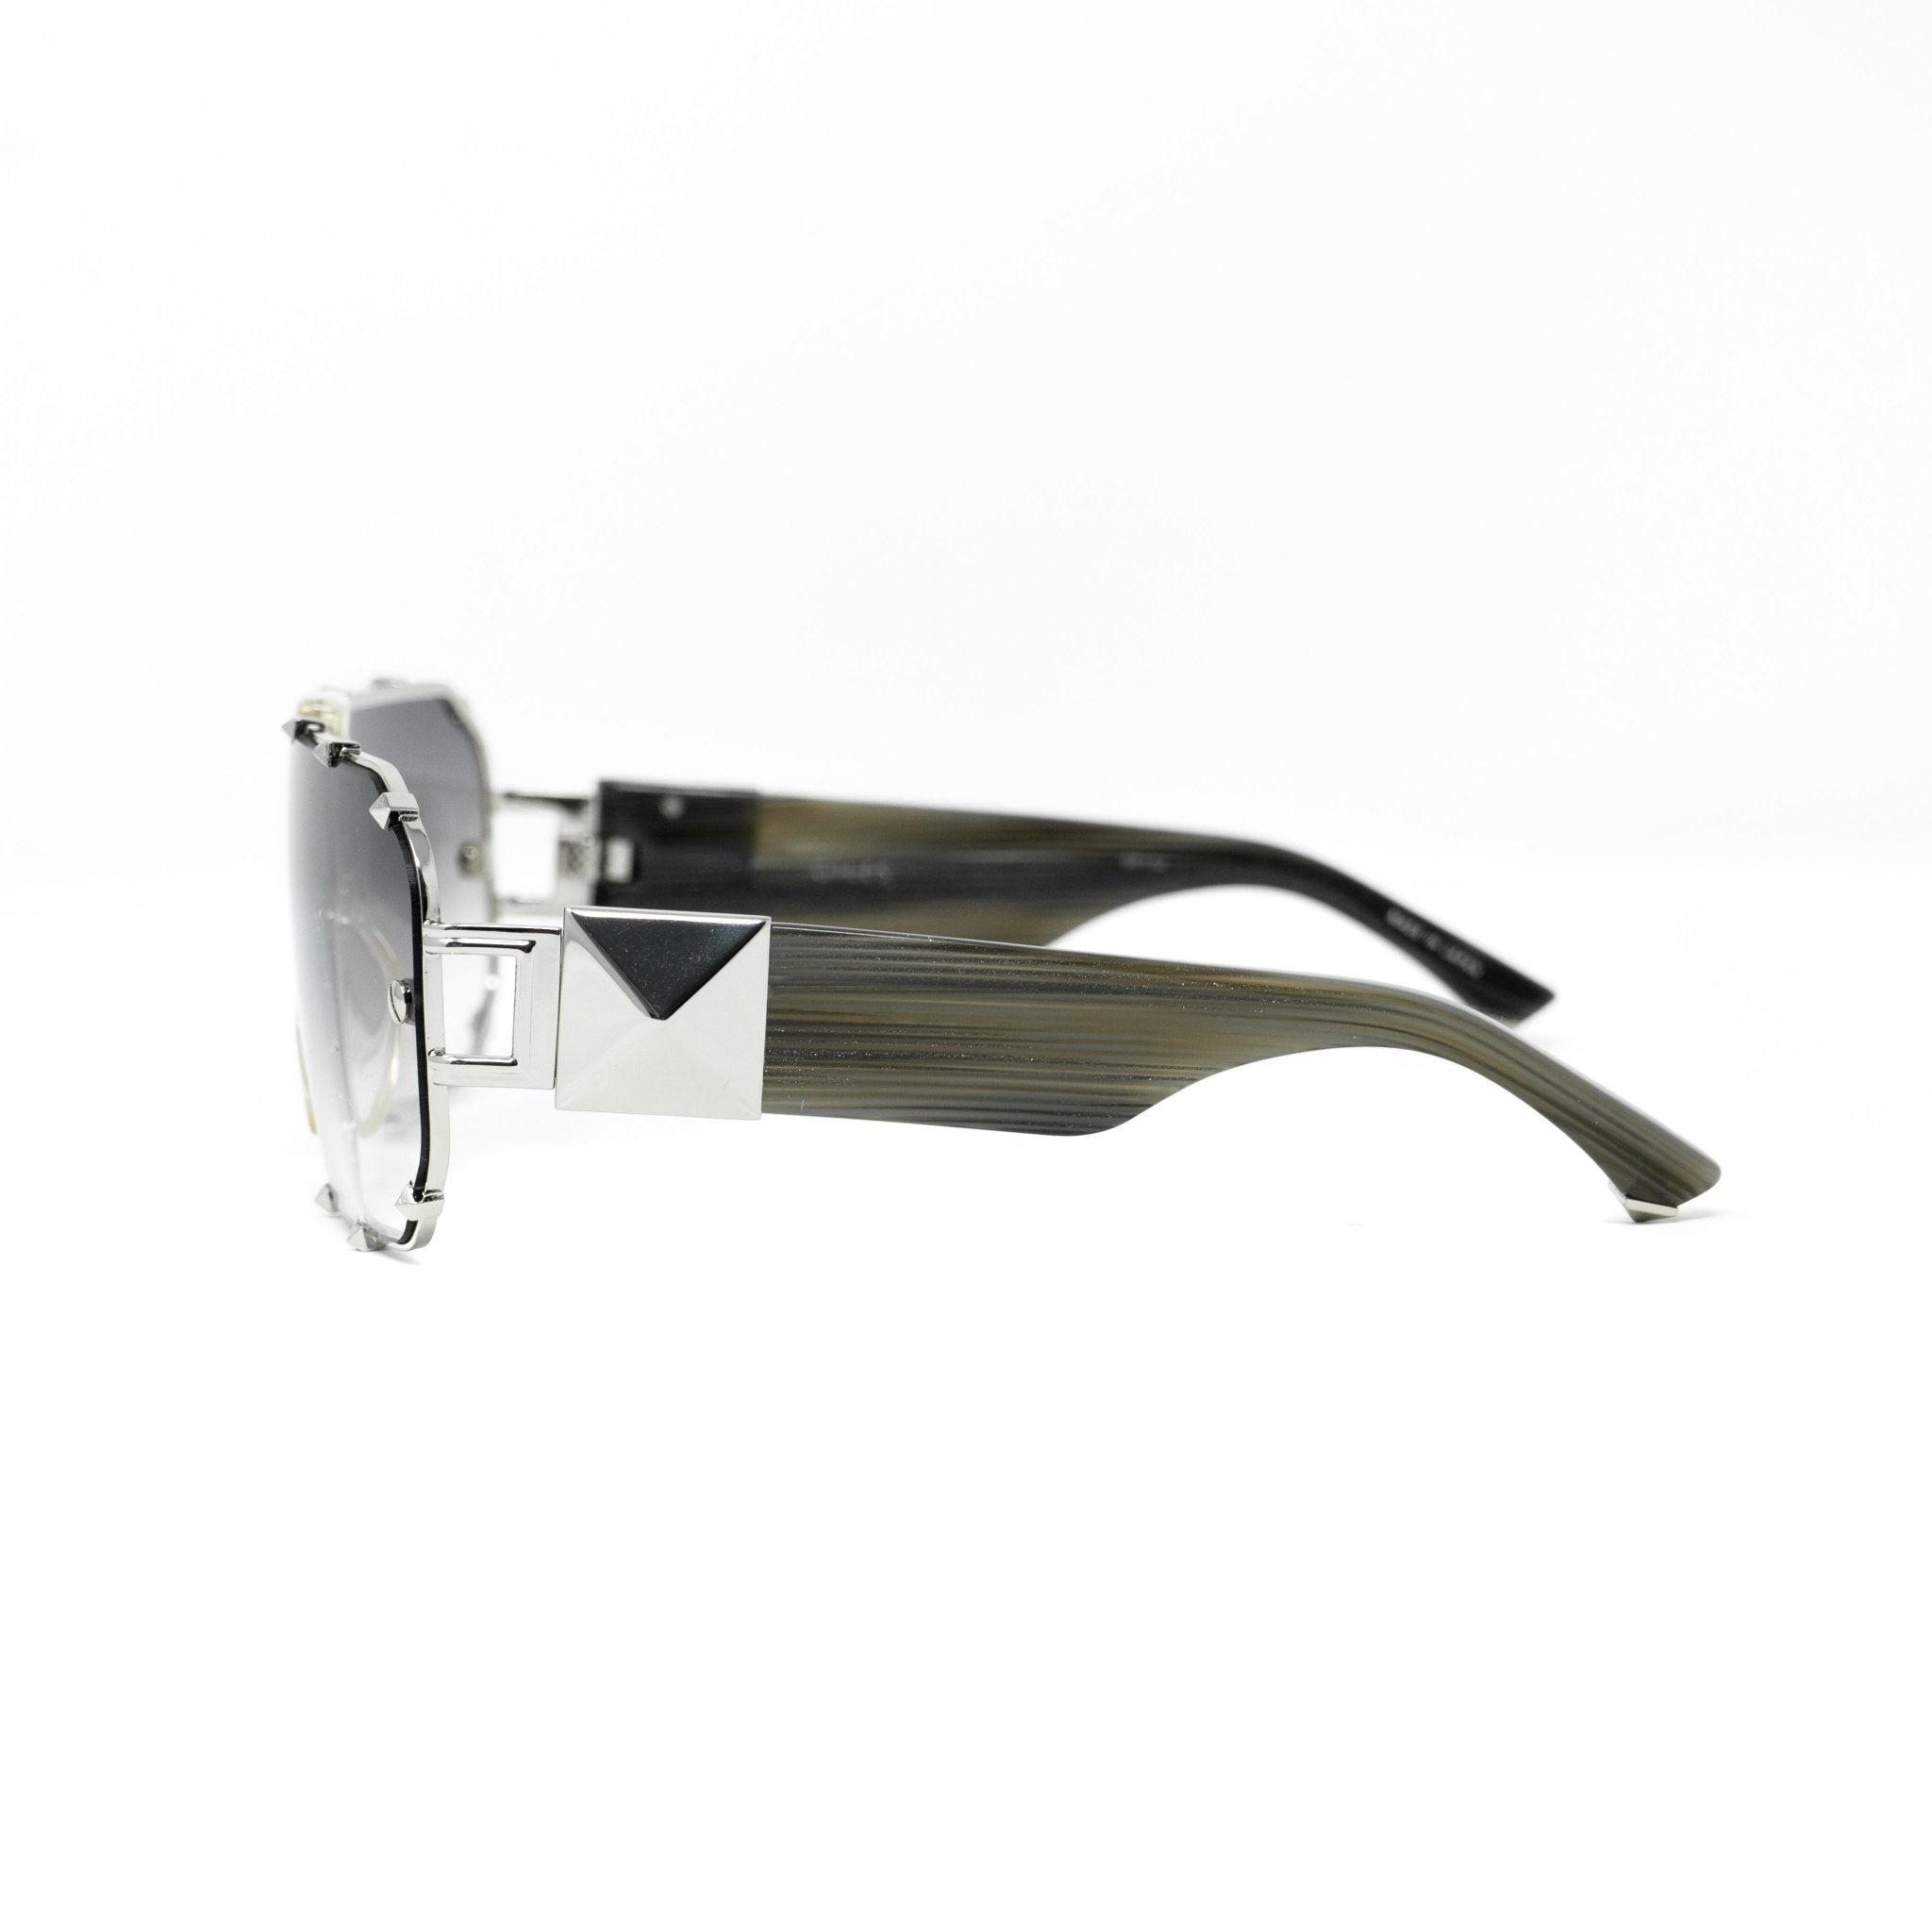 Giles Deacon Sunglasses Shield Black Horn Silver With Category 3 Grey Graduated Lenses 9GILES1C2BLACK - Watches & Crystals